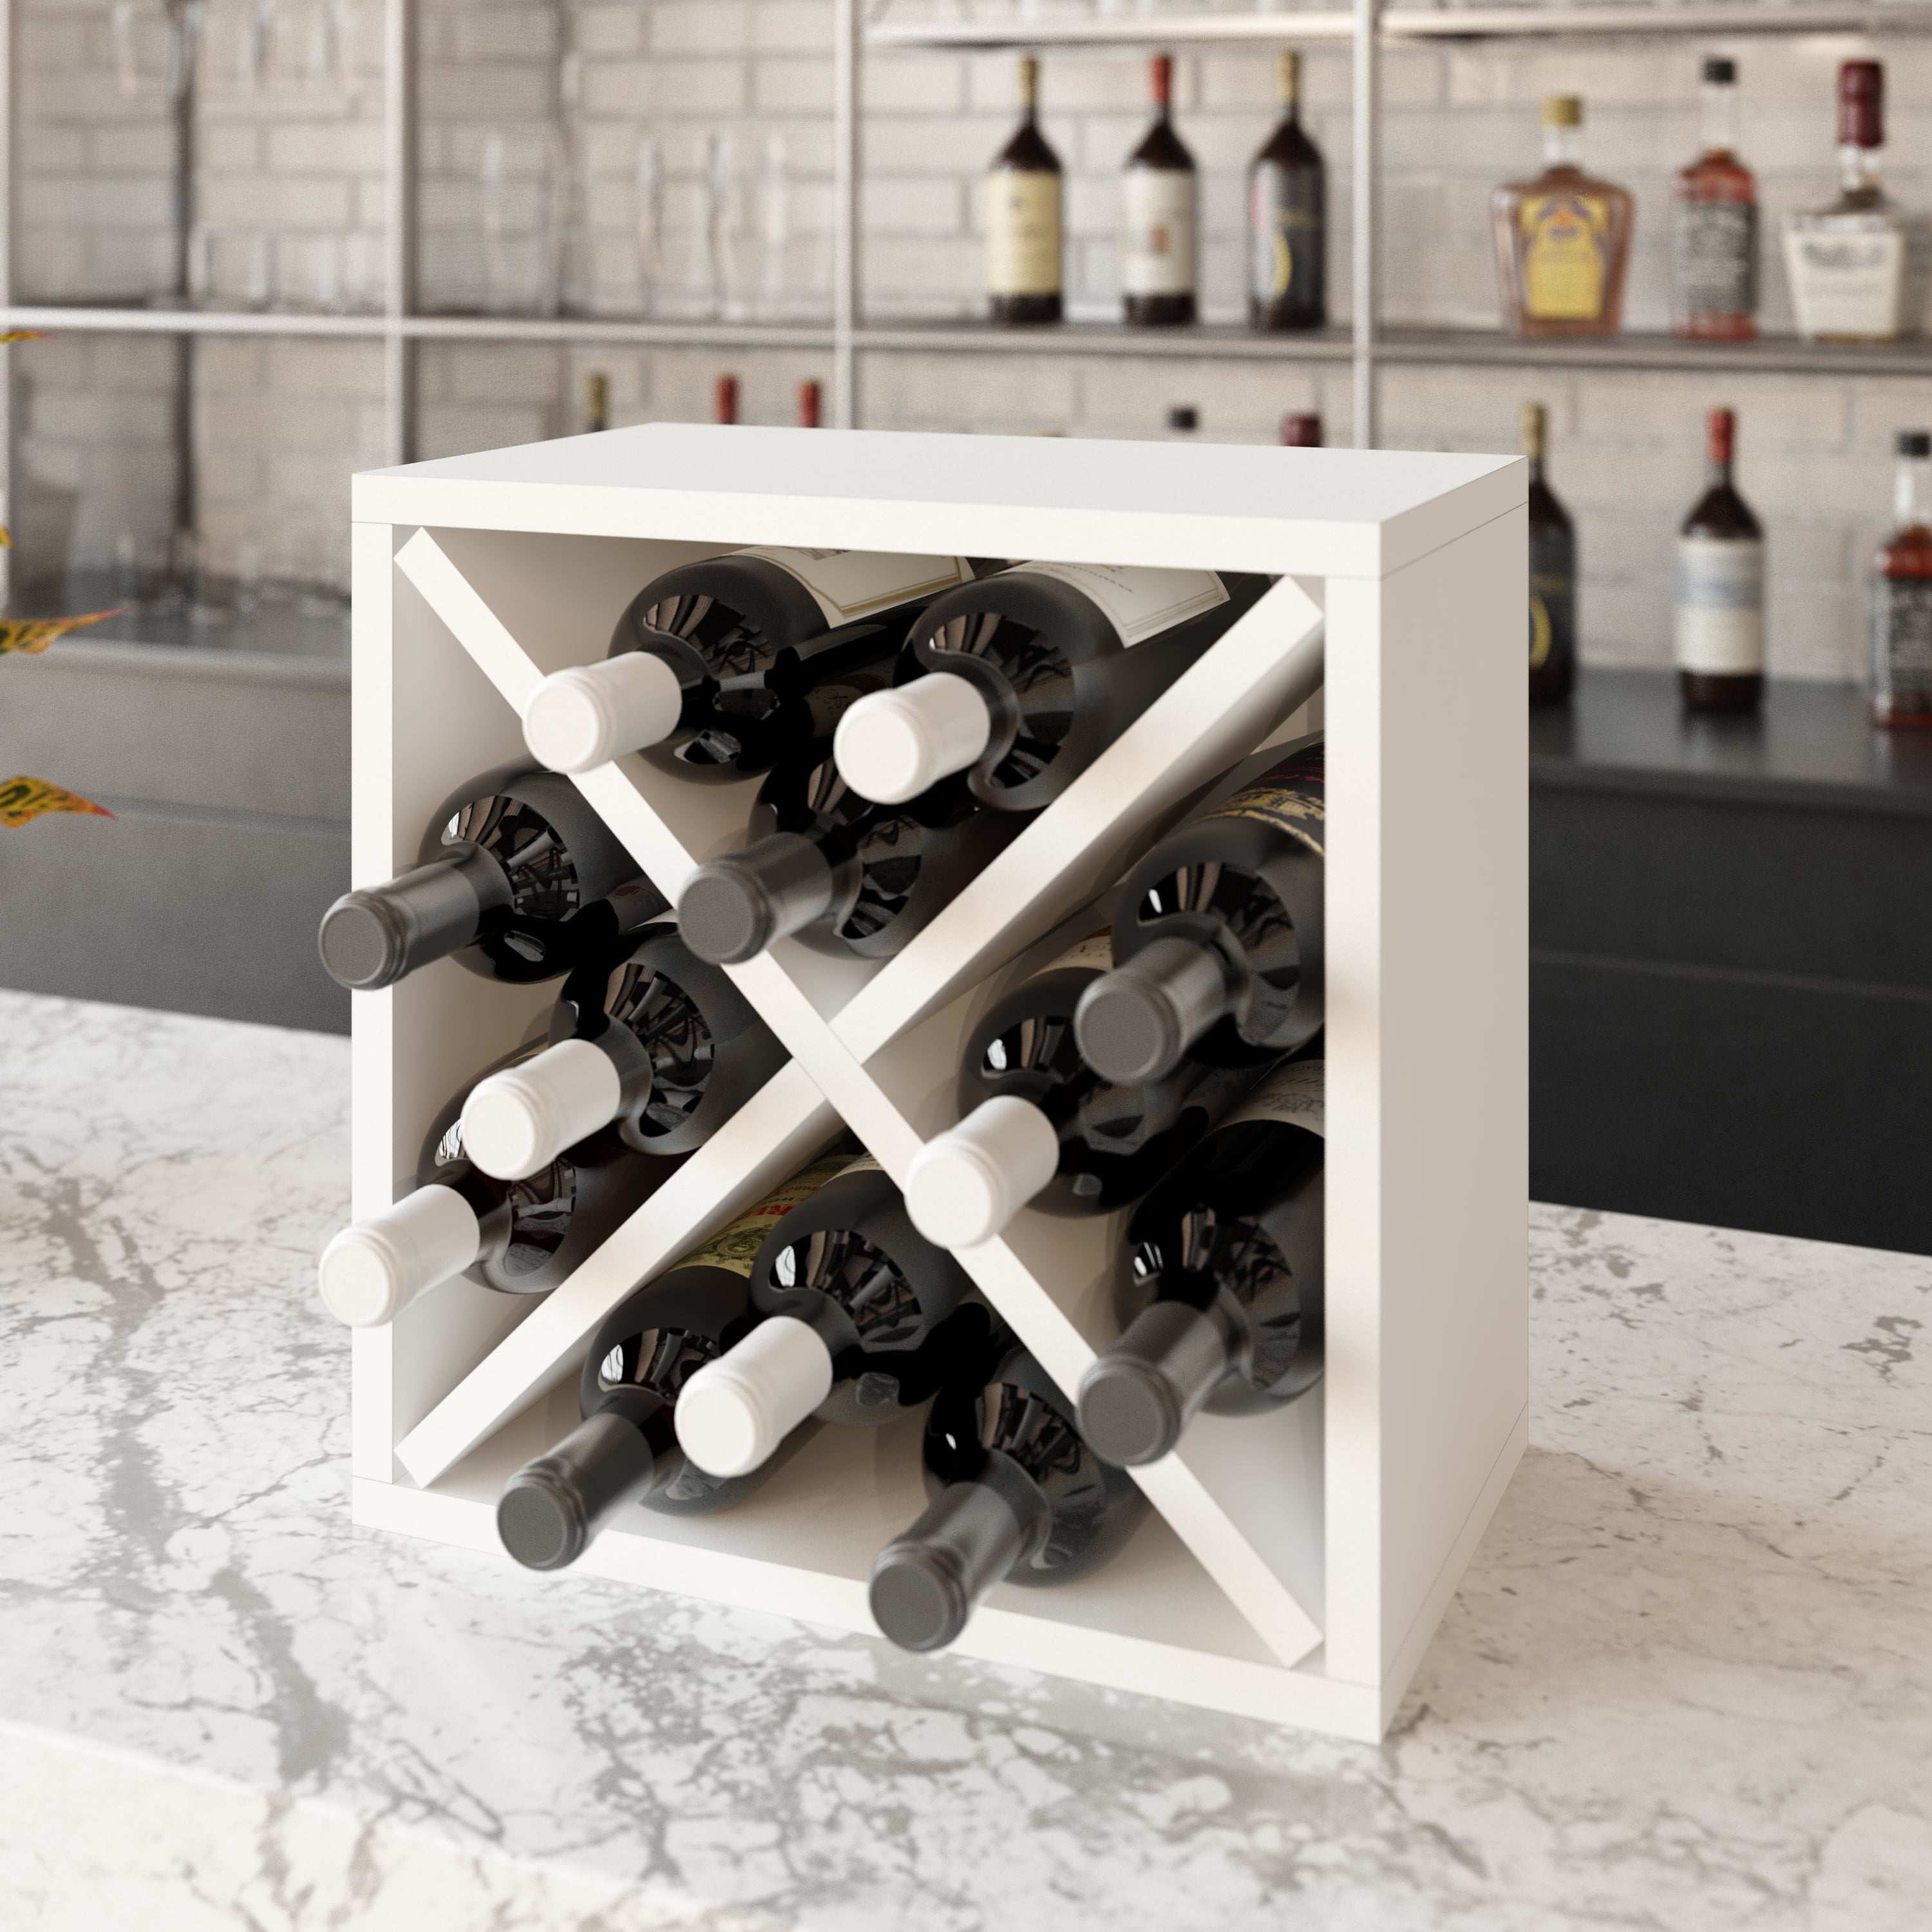 Wobble-Free Six-Tier, 36 Bottle Capacity Smartxchoices 36 Bottle Stackable Modular Wine Rack Small Wine Storage Rack Free Standing Solid Natural Wood Wine Holder Display Shelves